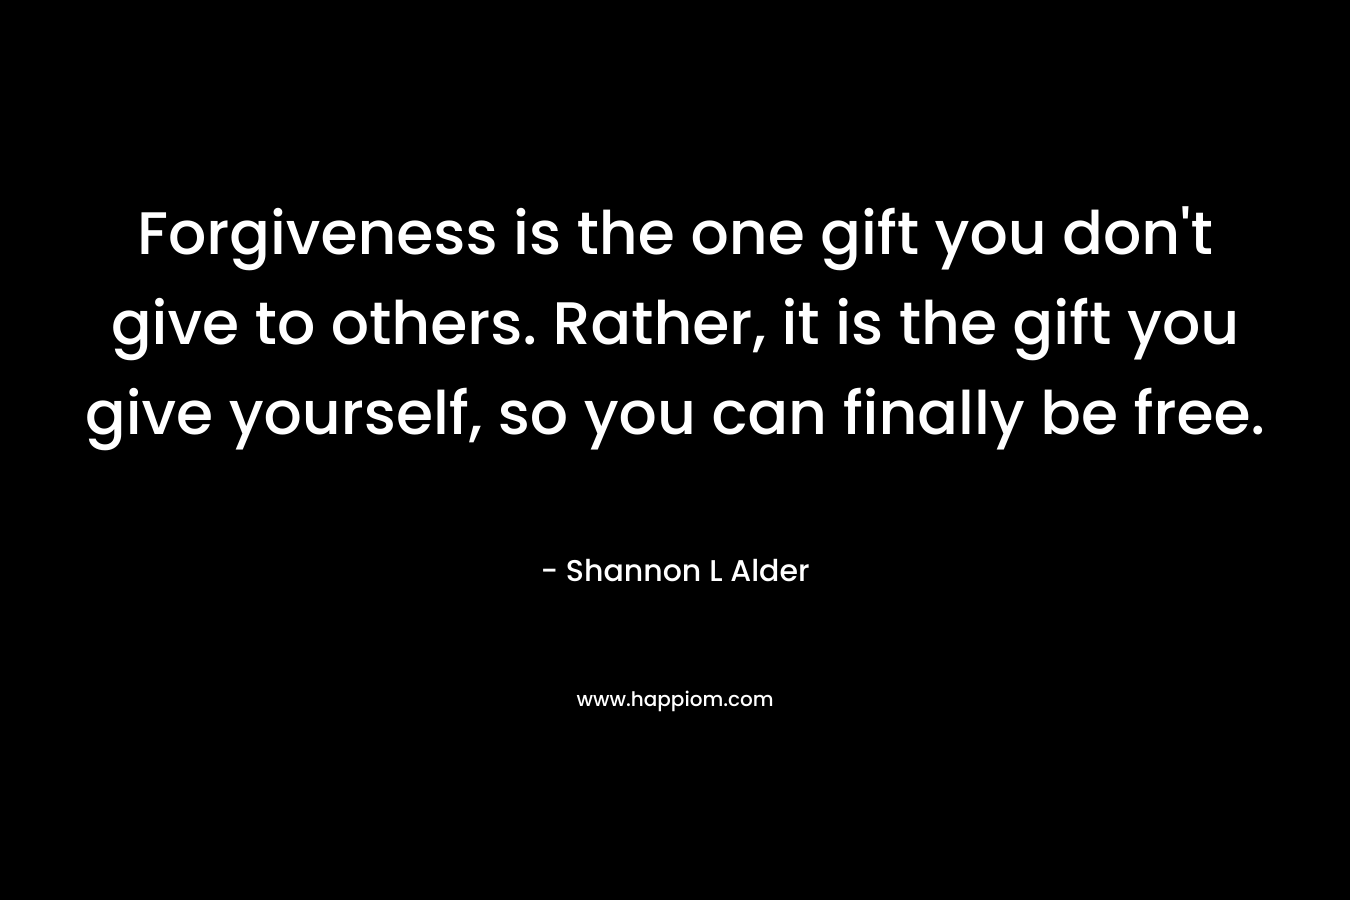 Forgiveness is the one gift you don't give to others. Rather, it is the gift you give yourself, so you can finally be free.